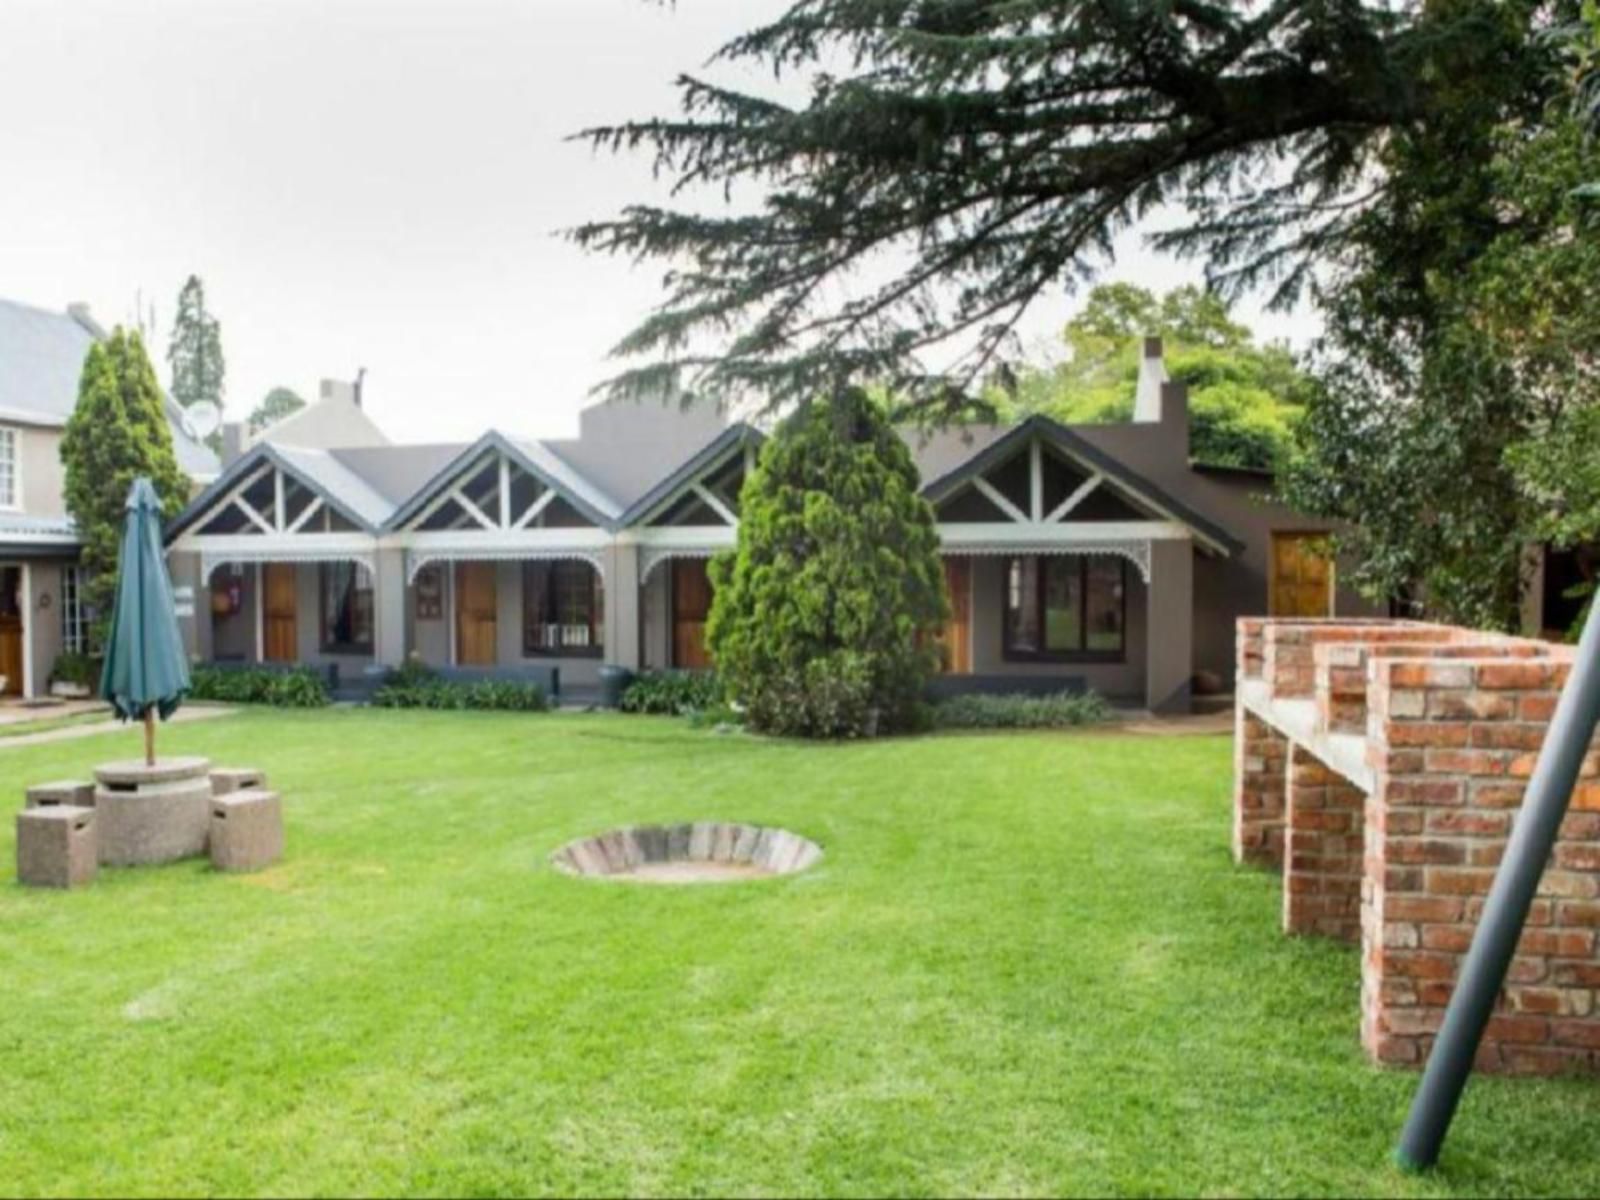 Bo Kamer Guesthouse Ermelo Mpumalanga South Africa House, Building, Architecture, Garden, Nature, Plant